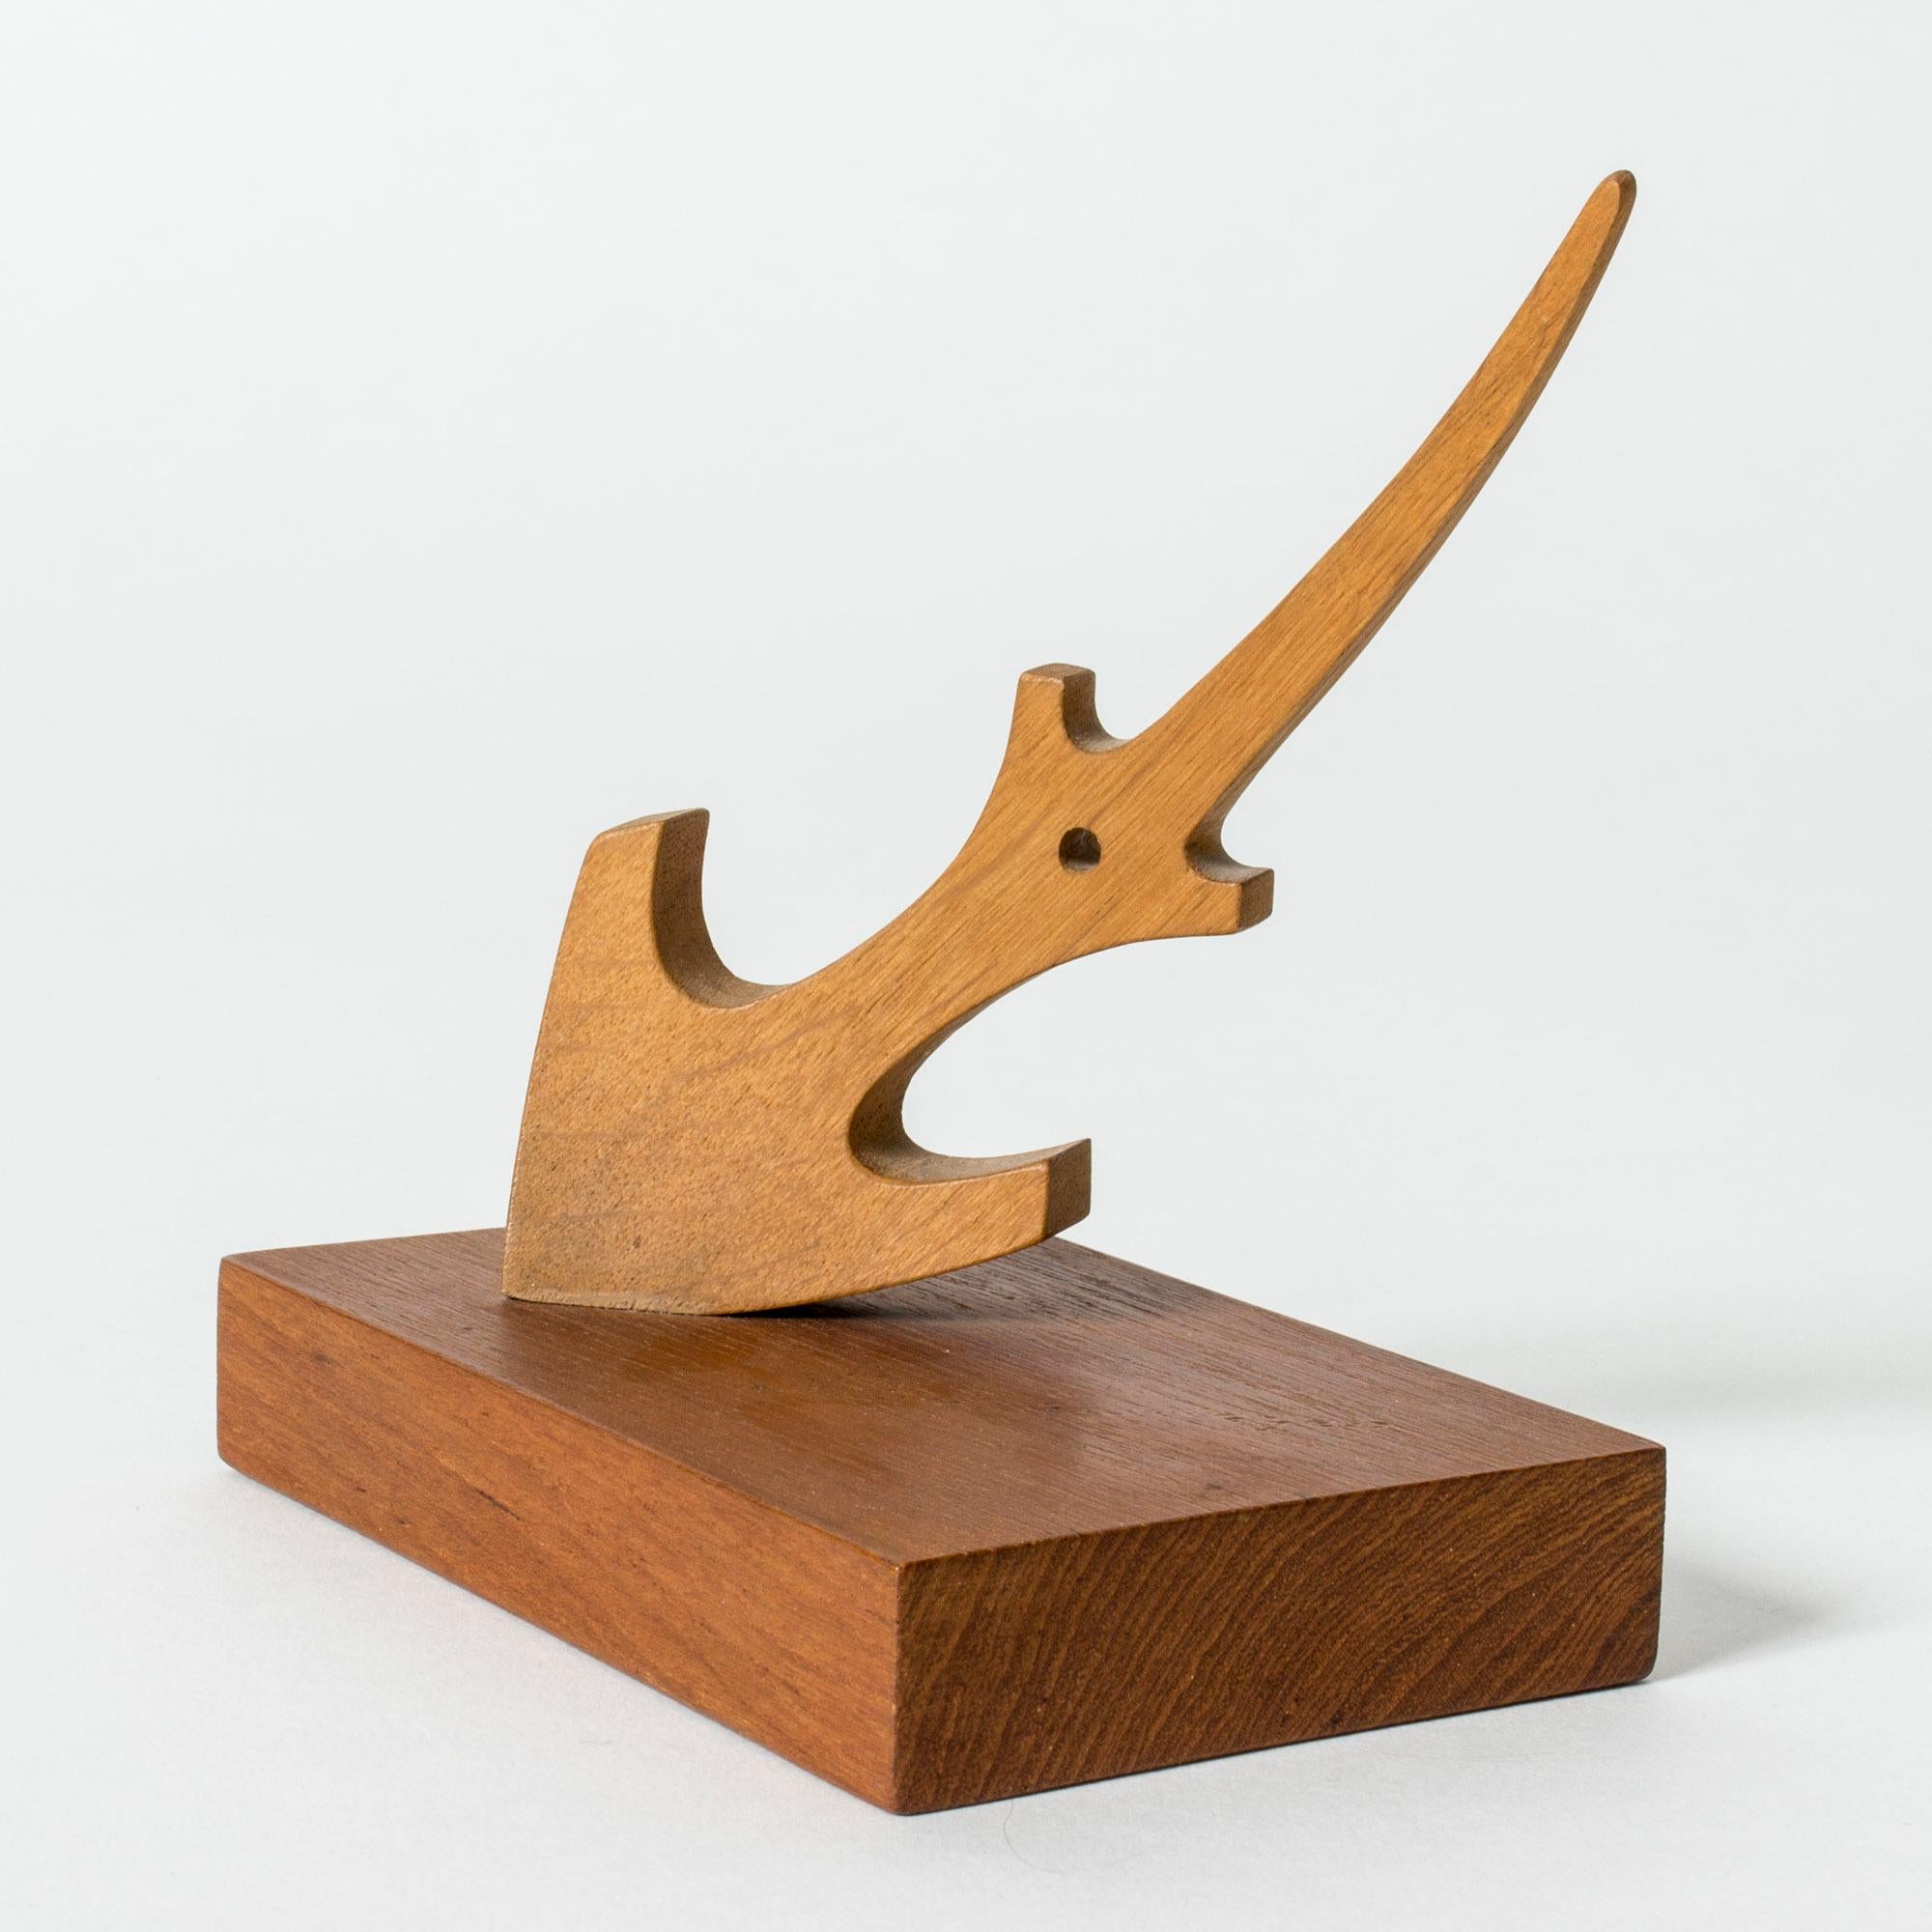 Lovely small anchor sculpture by Johnny Mattsson, sculpted from teak.

Aquatic themes are recurring in Johnny Mattsson’s artistry, sailing and the archipelago being important parts of his life. The anchor is also found in the municipal coat of arms